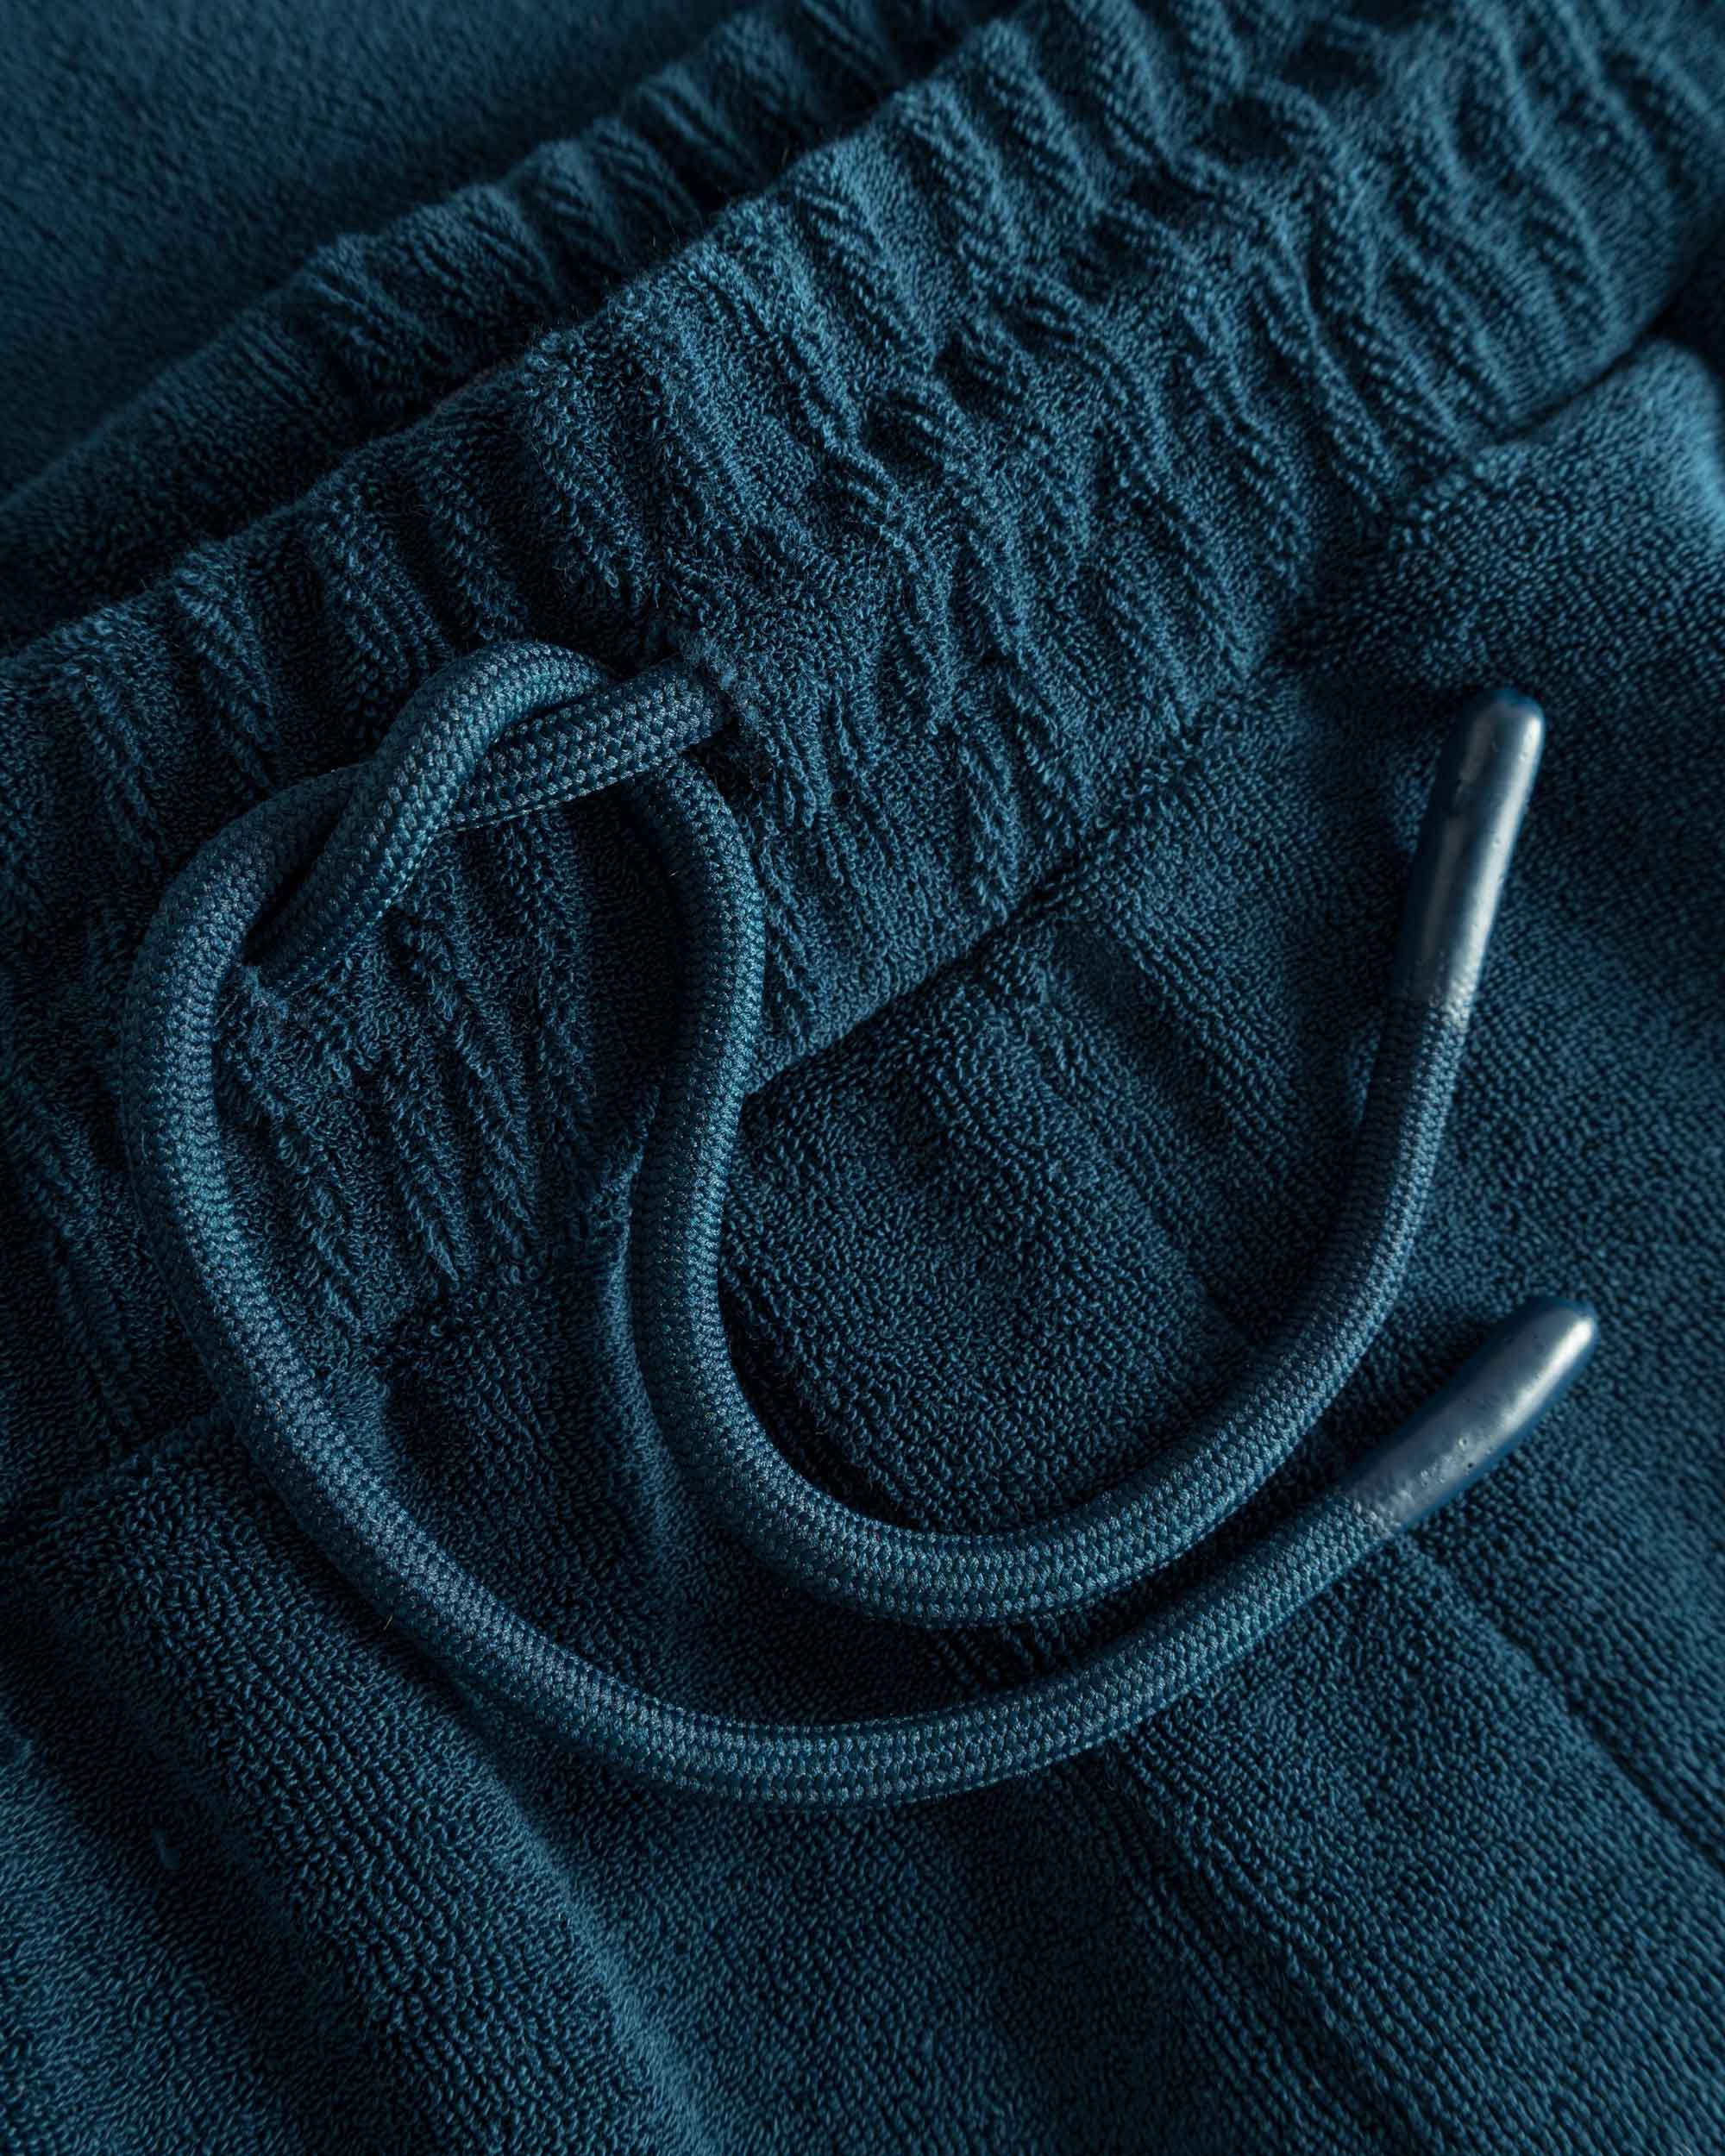 Close up on drawstring on navy colored low cut shorts in terry toweling fabric